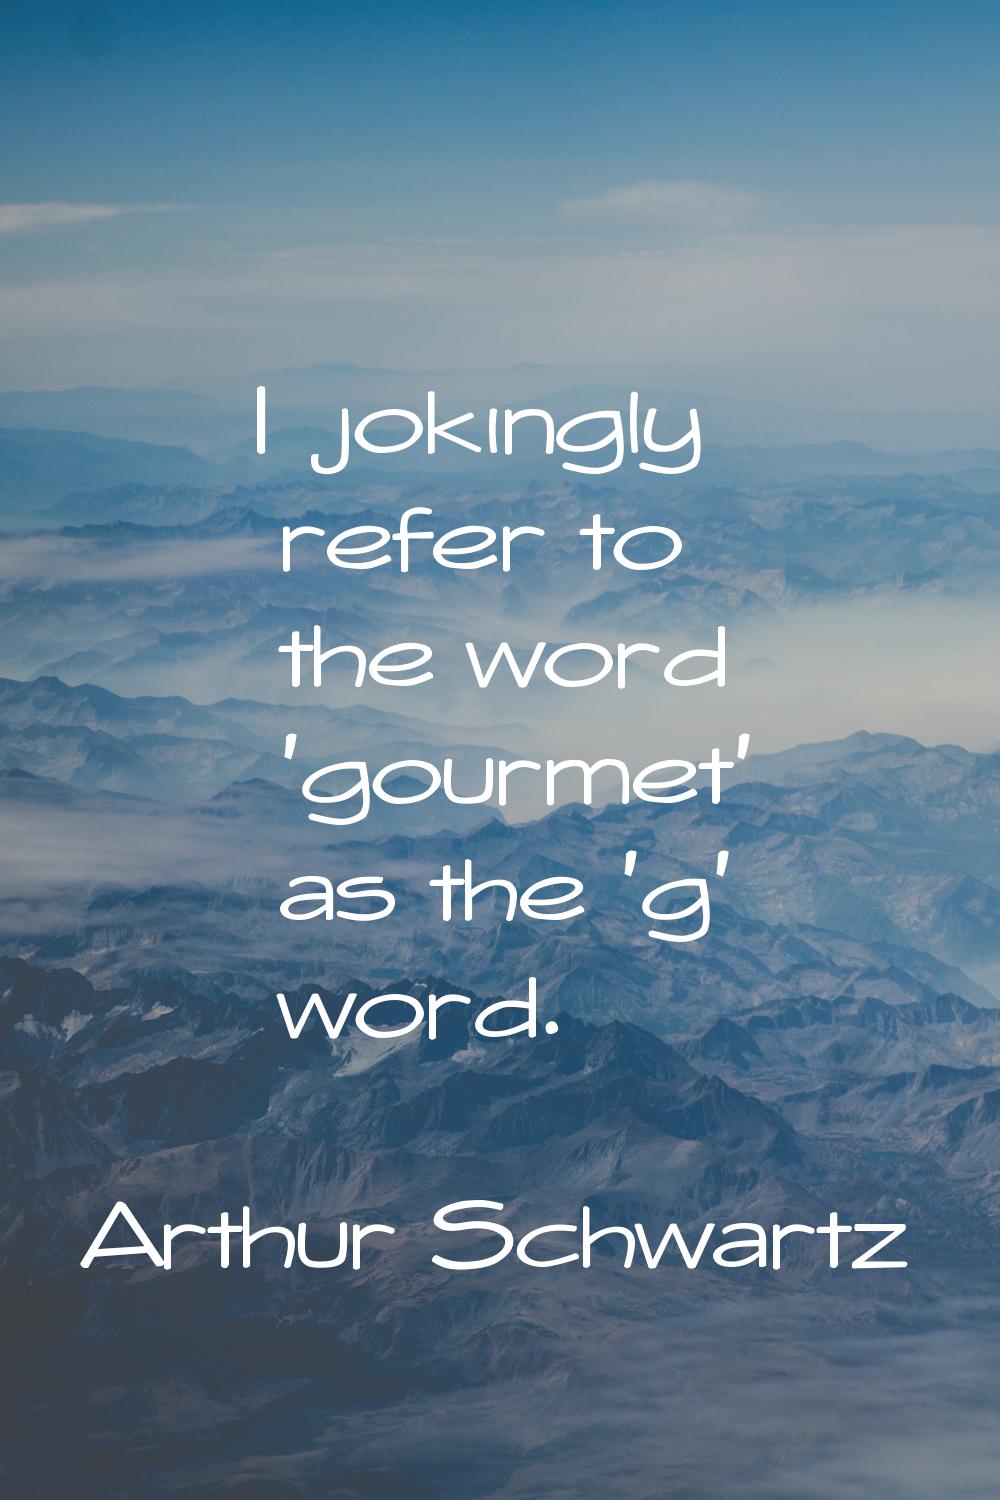 I jokingly refer to the word 'gourmet' as the 'g' word.